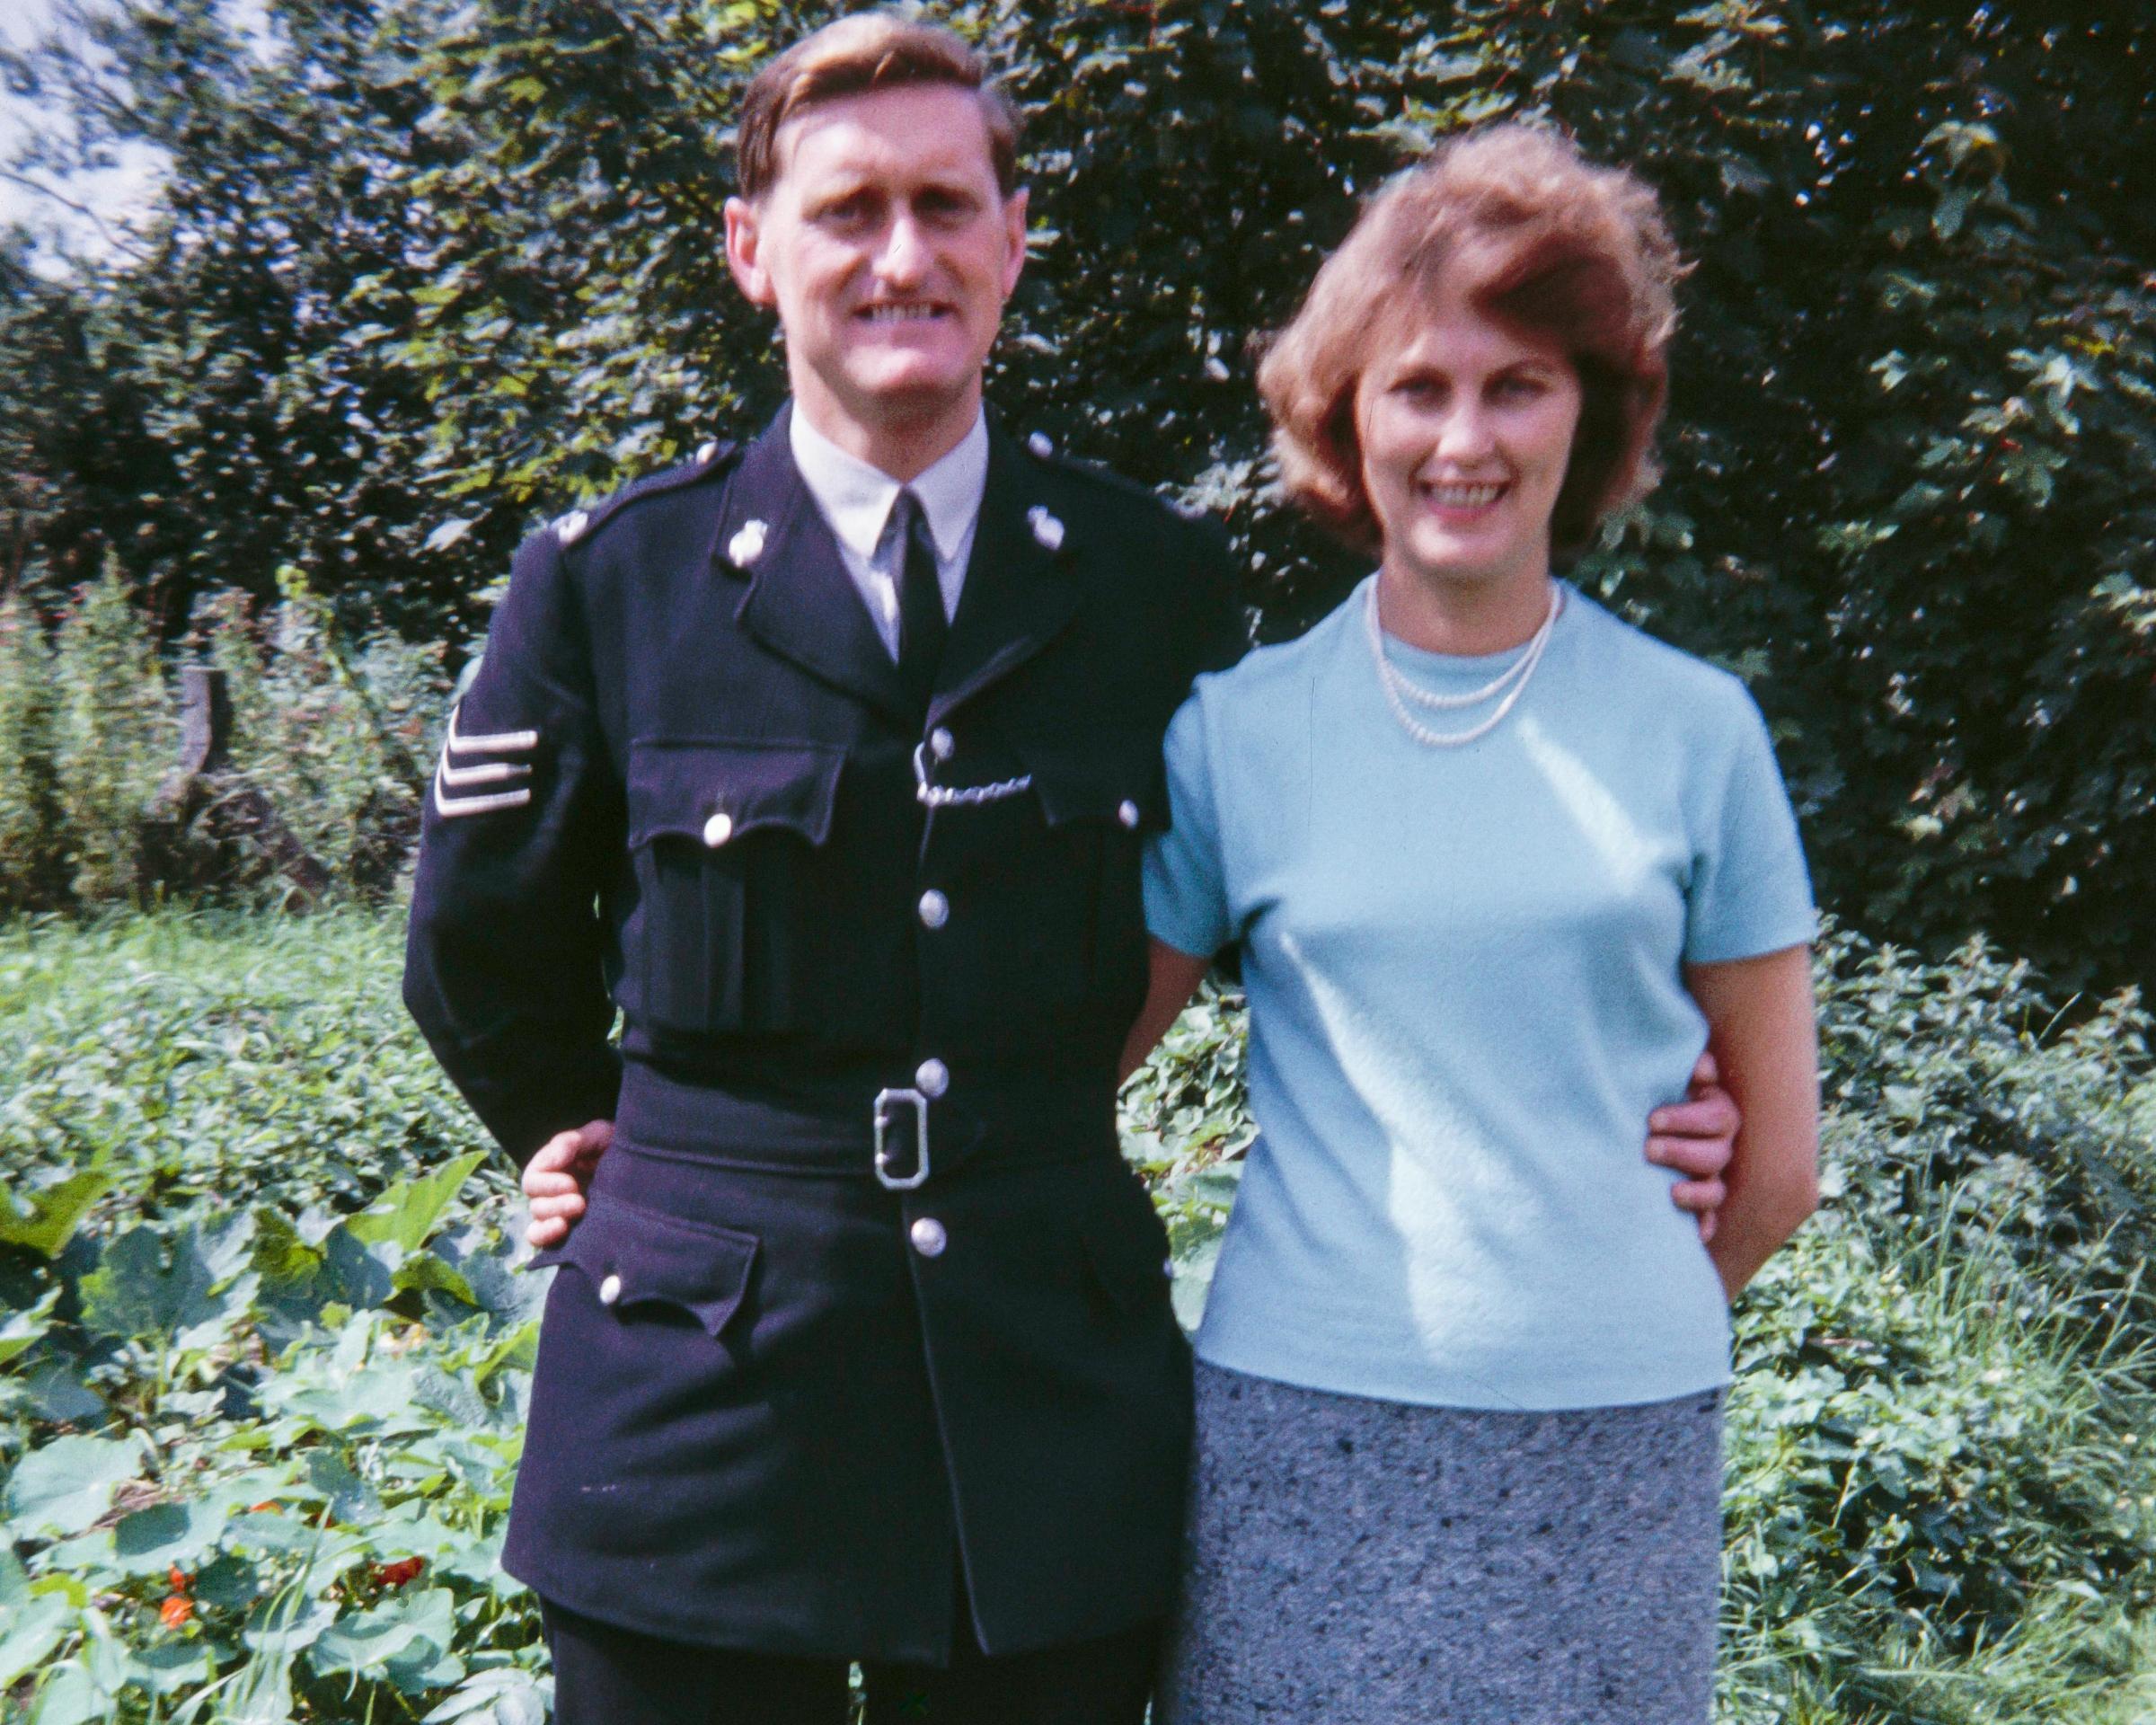 Ronald Cussons pictured with his wife Betty in 1965